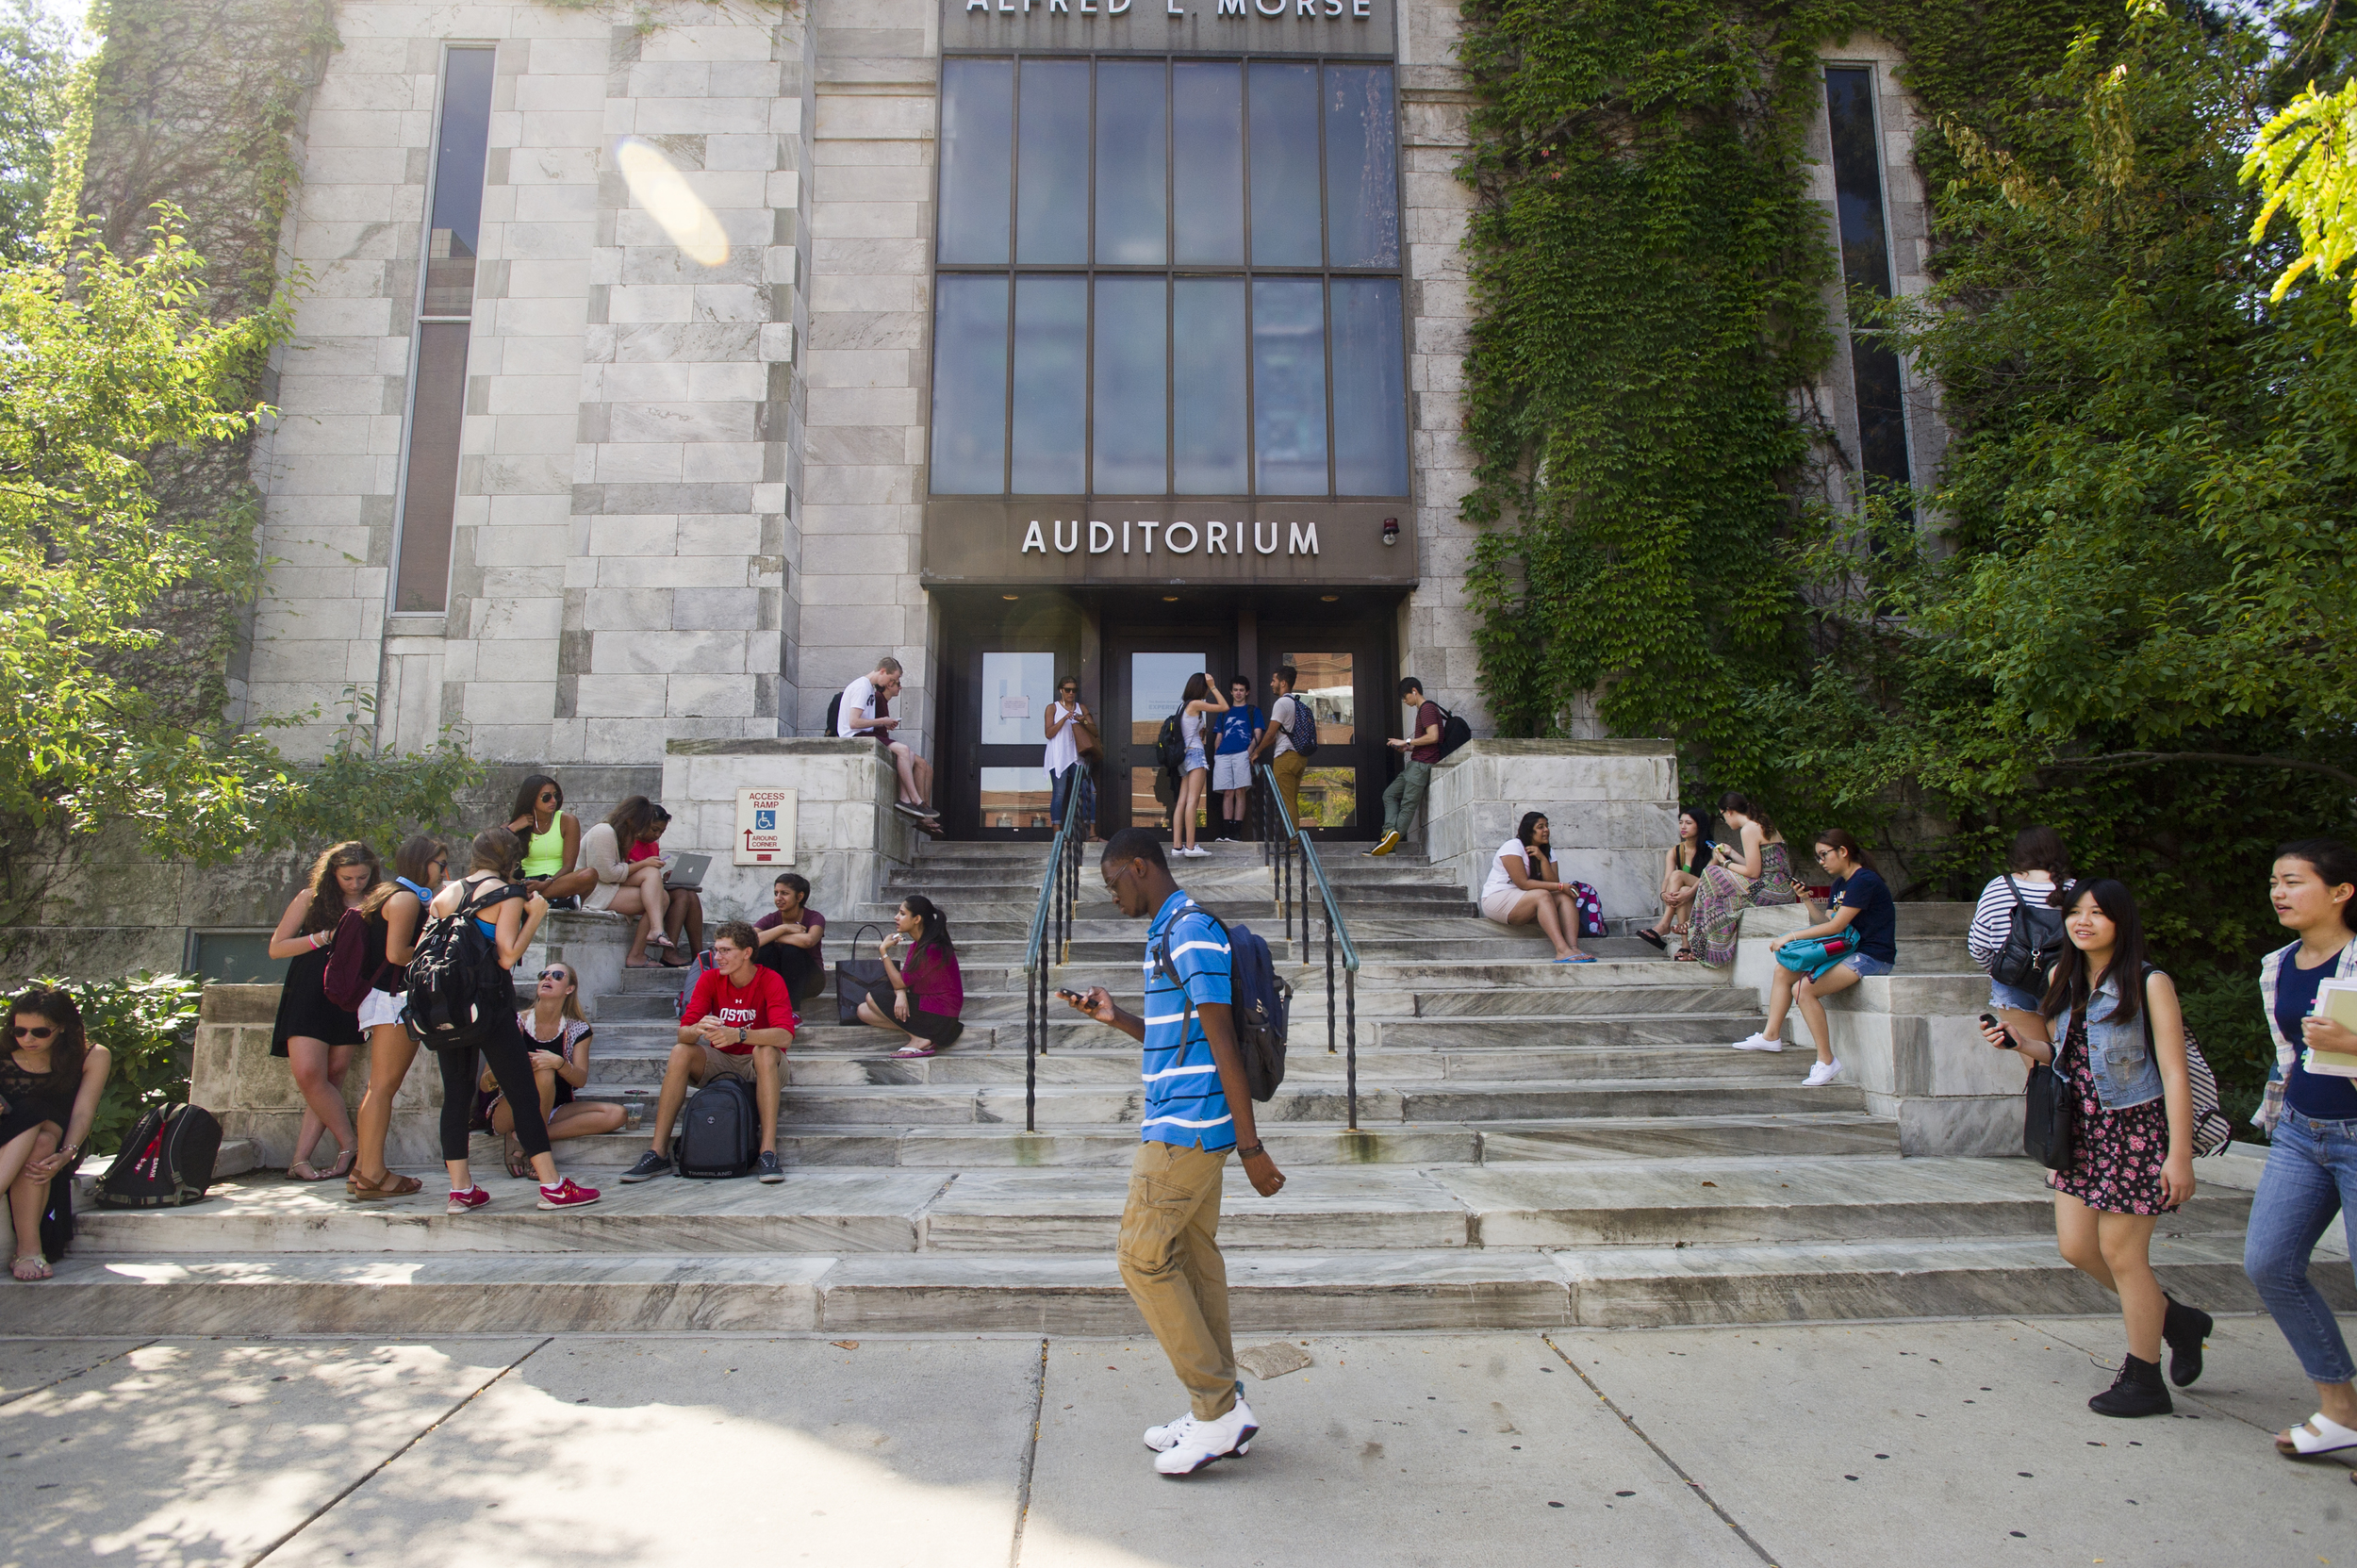  Students come and go from class outside Alfred L Morse Auditorium in the morning of September 5, 2014. &nbsp;Photo by Cydney Scott for Boston University Photography 